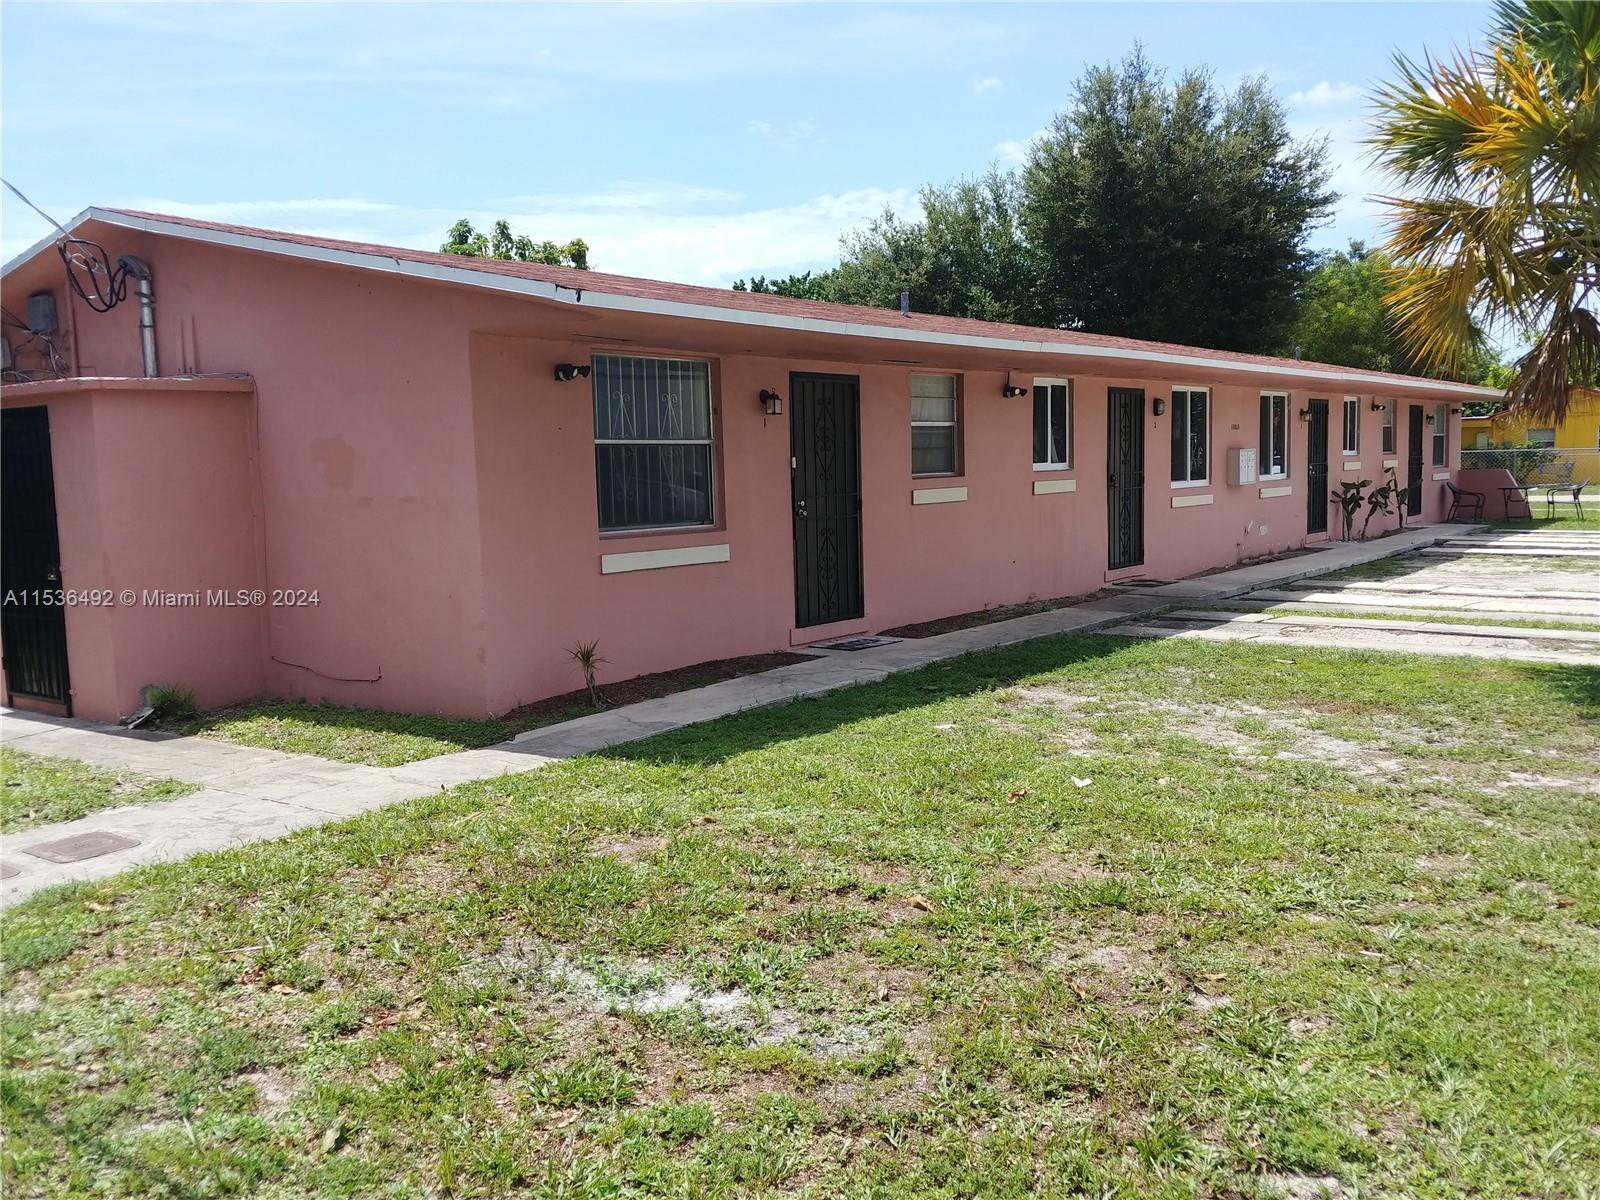 Photo of 13865 NW 26th Ave #3 in Opa-Locka, FL